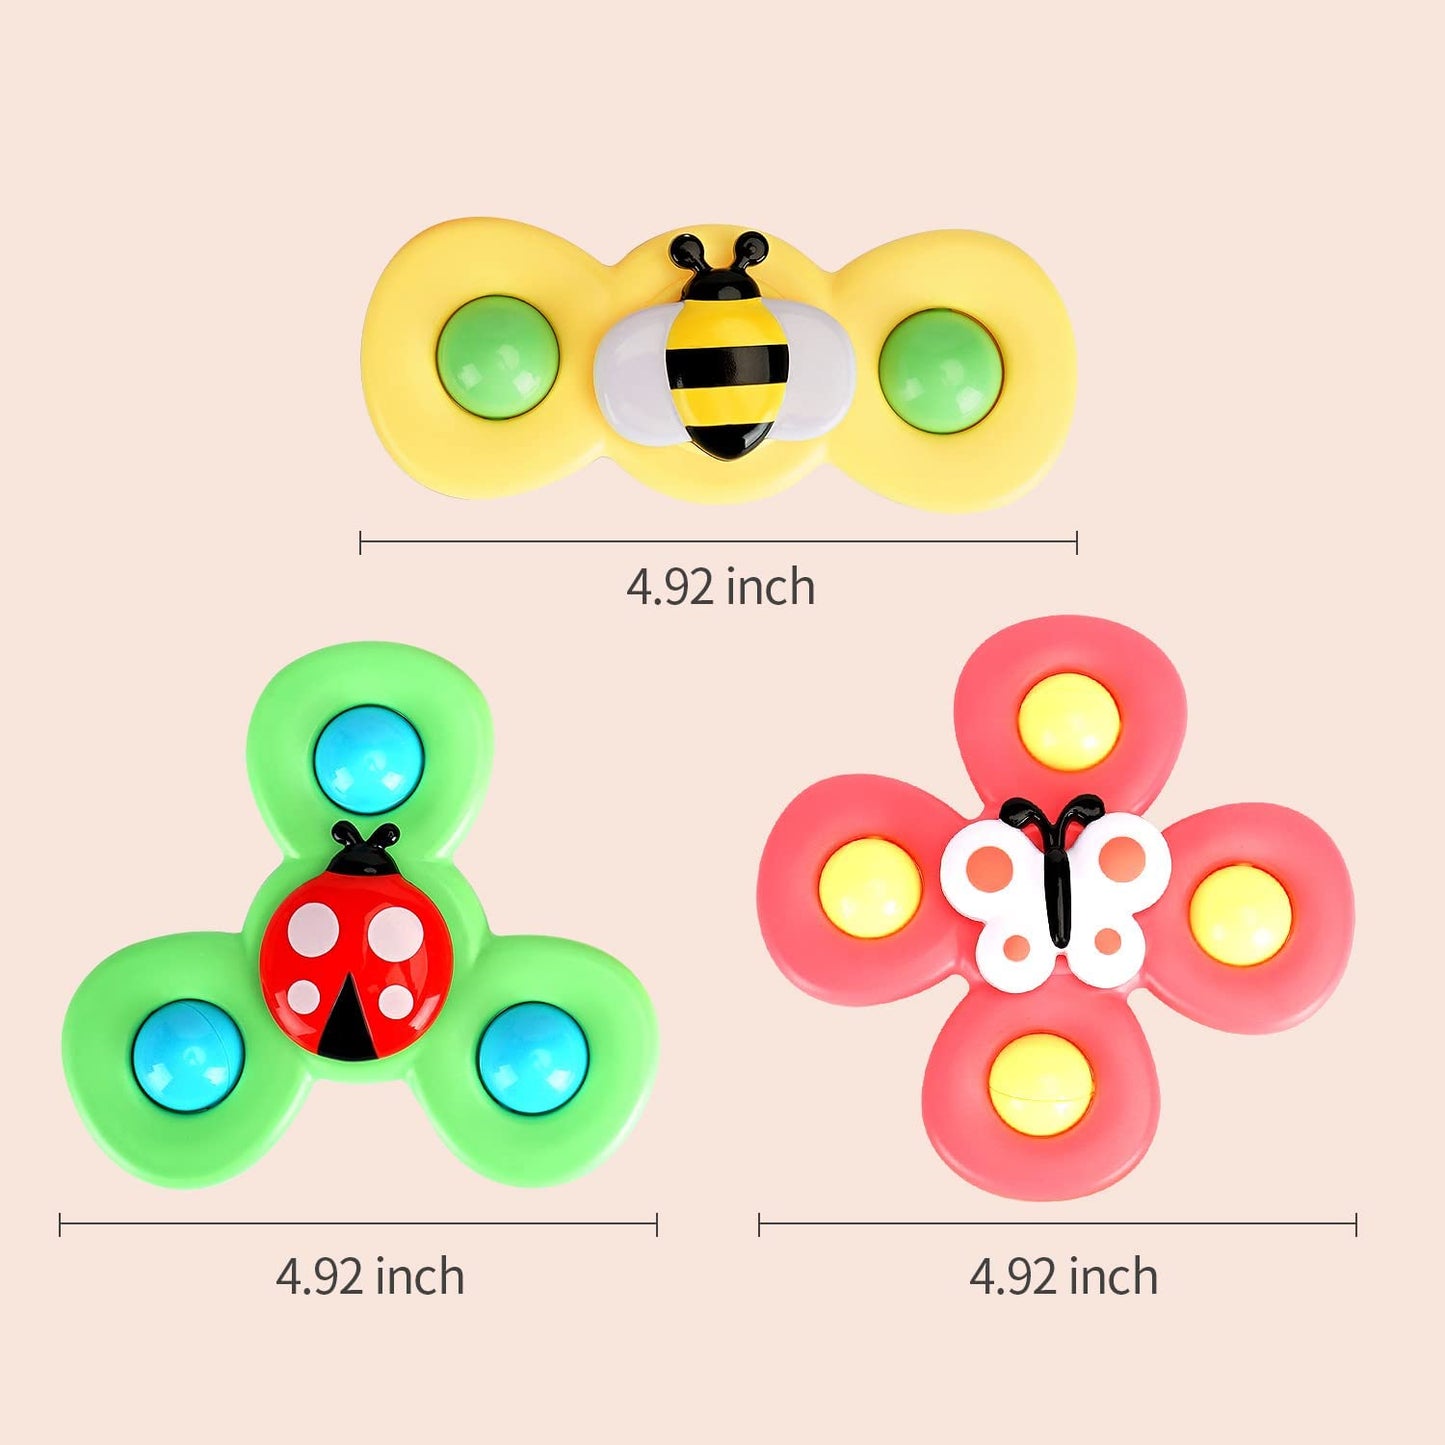 Suction Cup Spinner Toy for Baby – 3 Pcs Spinning Top Learning Suctions Toys for Baby Toddlers Soft Silicone Sensory Fidgeting Toy Bath Toy Gift for Babies Infant Gifts for Christmas, Birthday